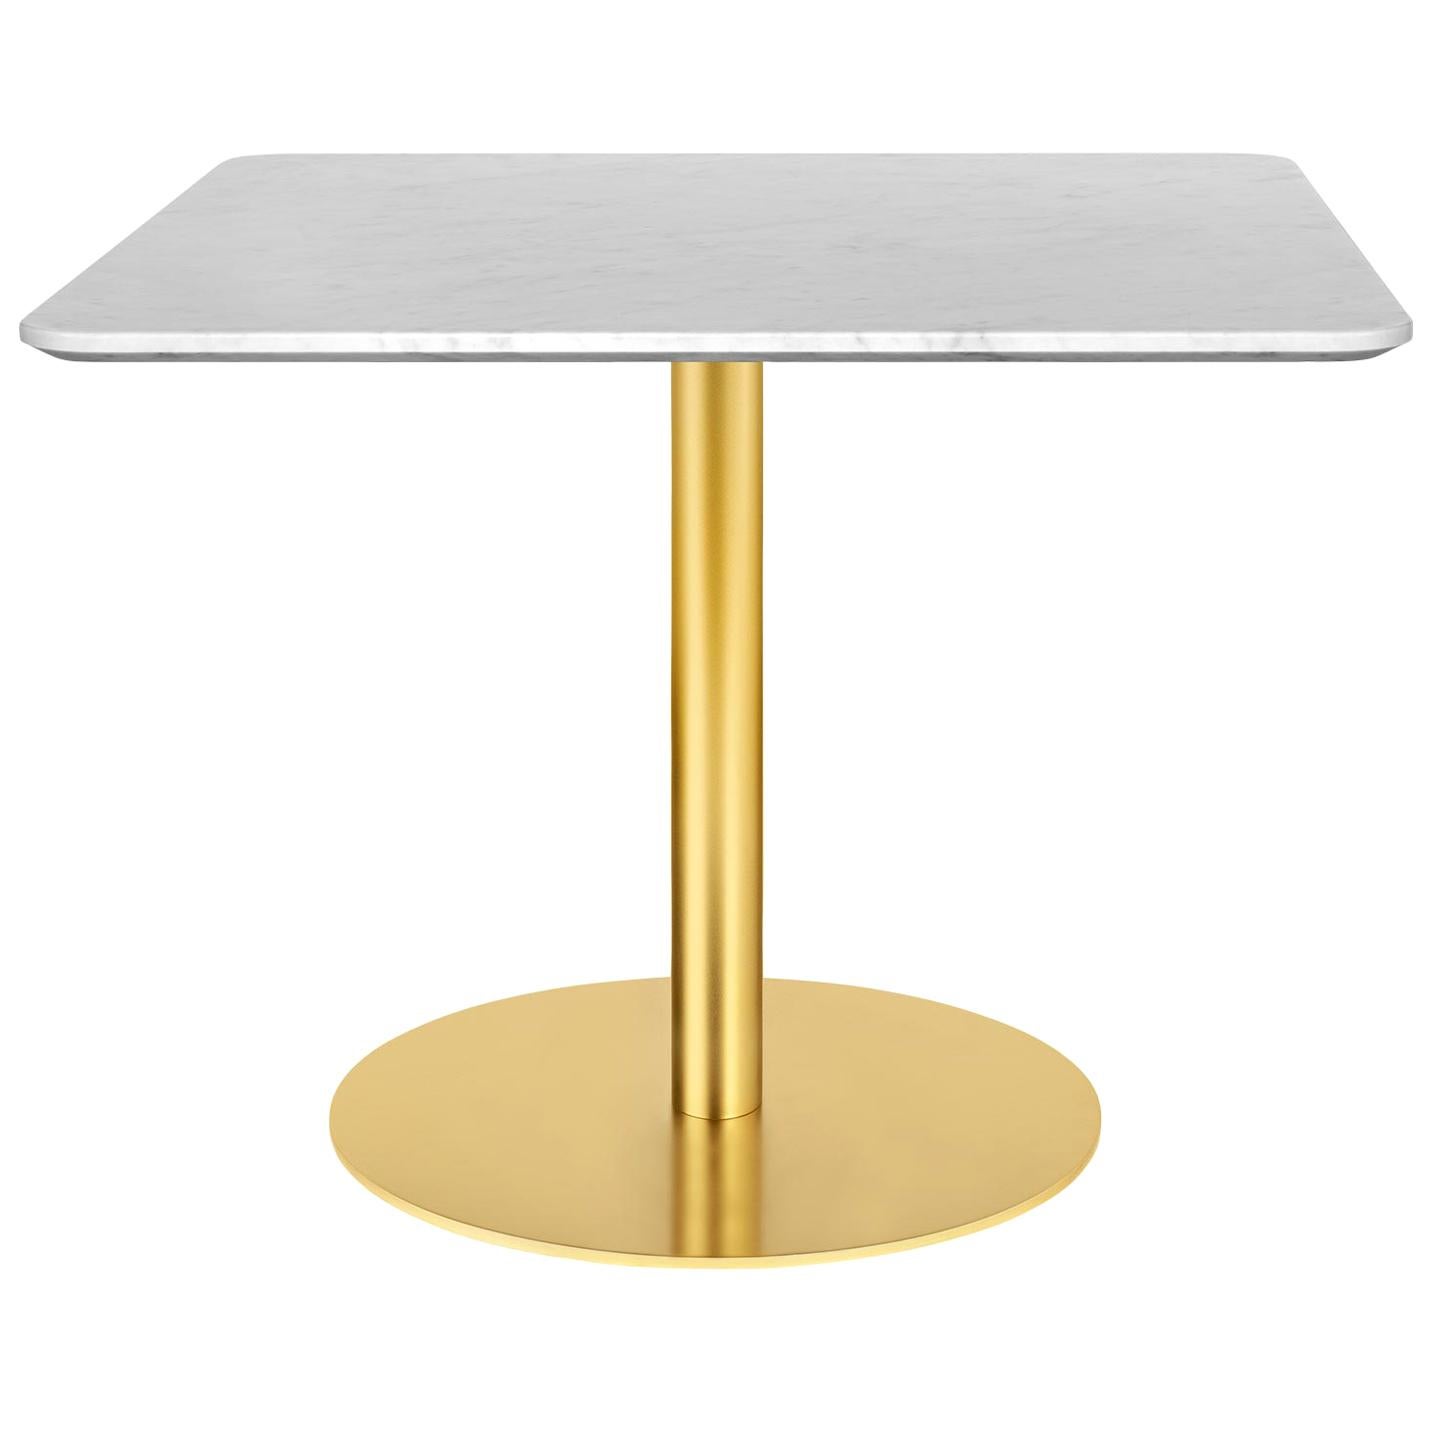 1.0 Lounge Table, Square, Round Brass Base, Large, Marble